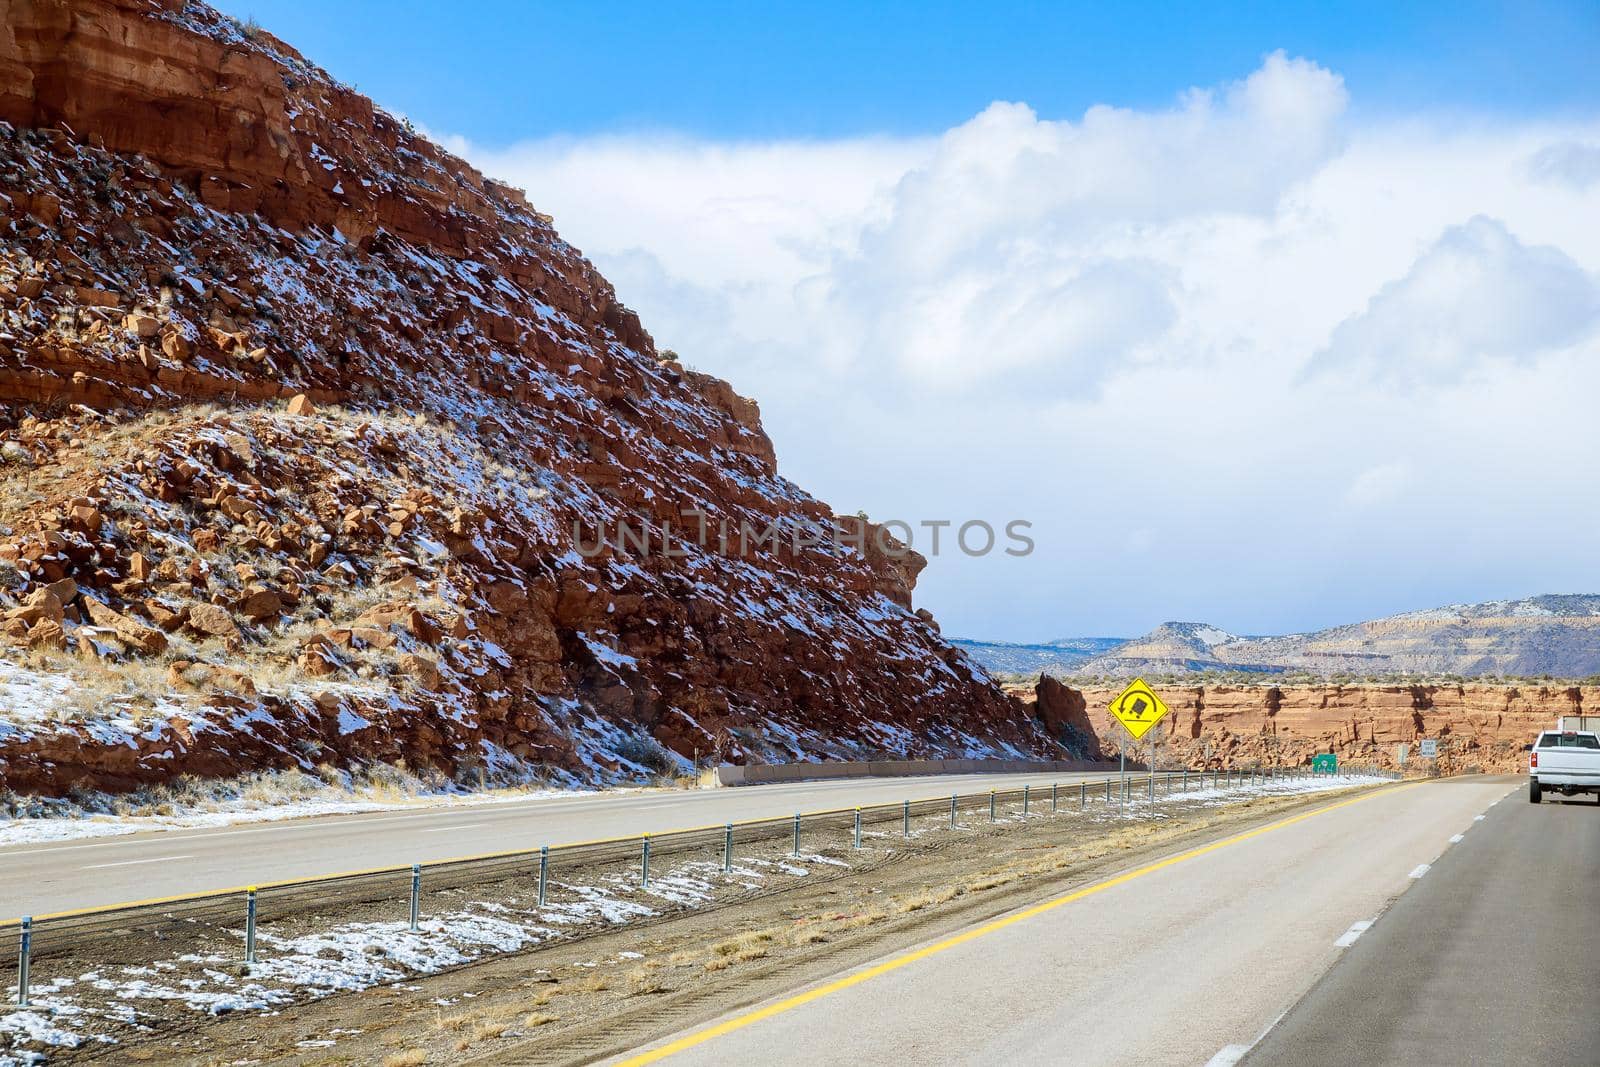 The snow-covered red rock mountain range behind desert landscape along I-40 highway in New Mexico by ungvar